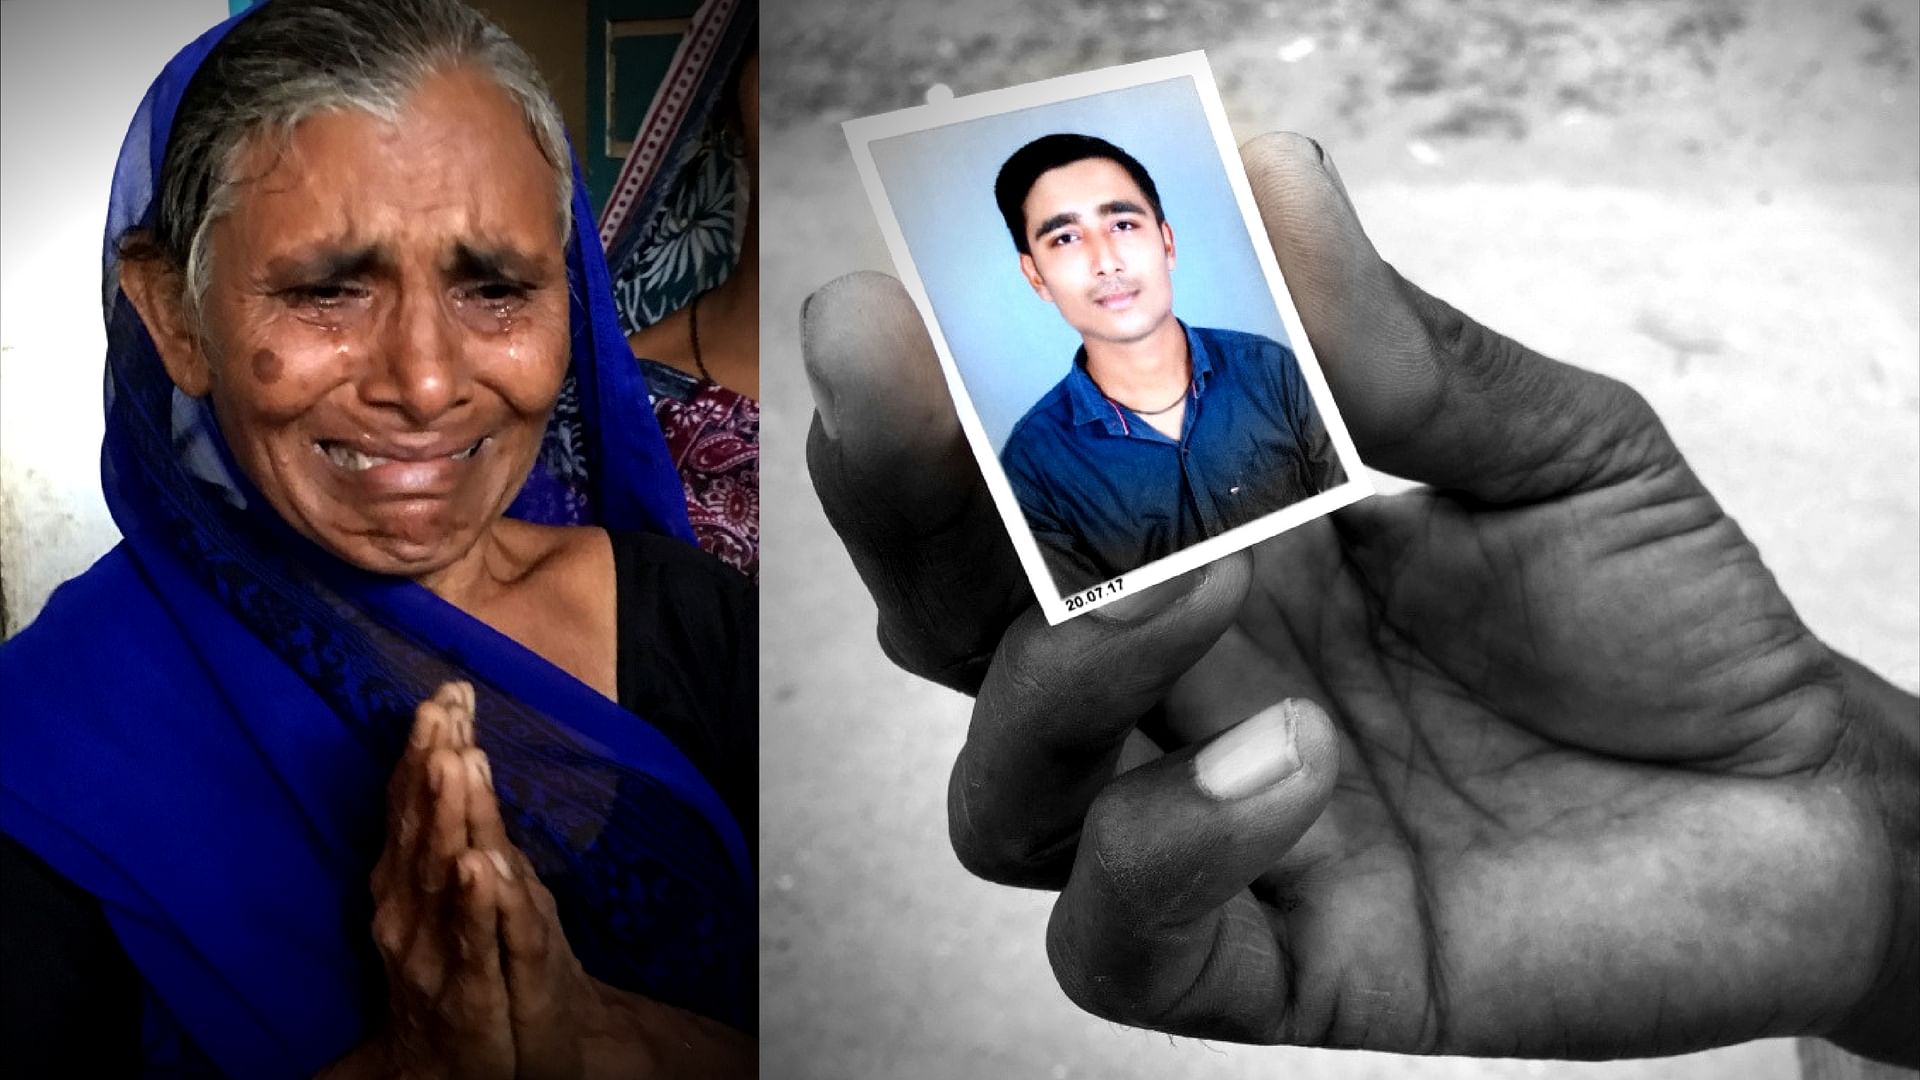 19-year-old Dalit youth Jayesh Solanki was killed allegedly for watching the garba. His mother, Madhuben, weeps for justice. (Photo: Meghnad Bose/<b>The Quint</b>)